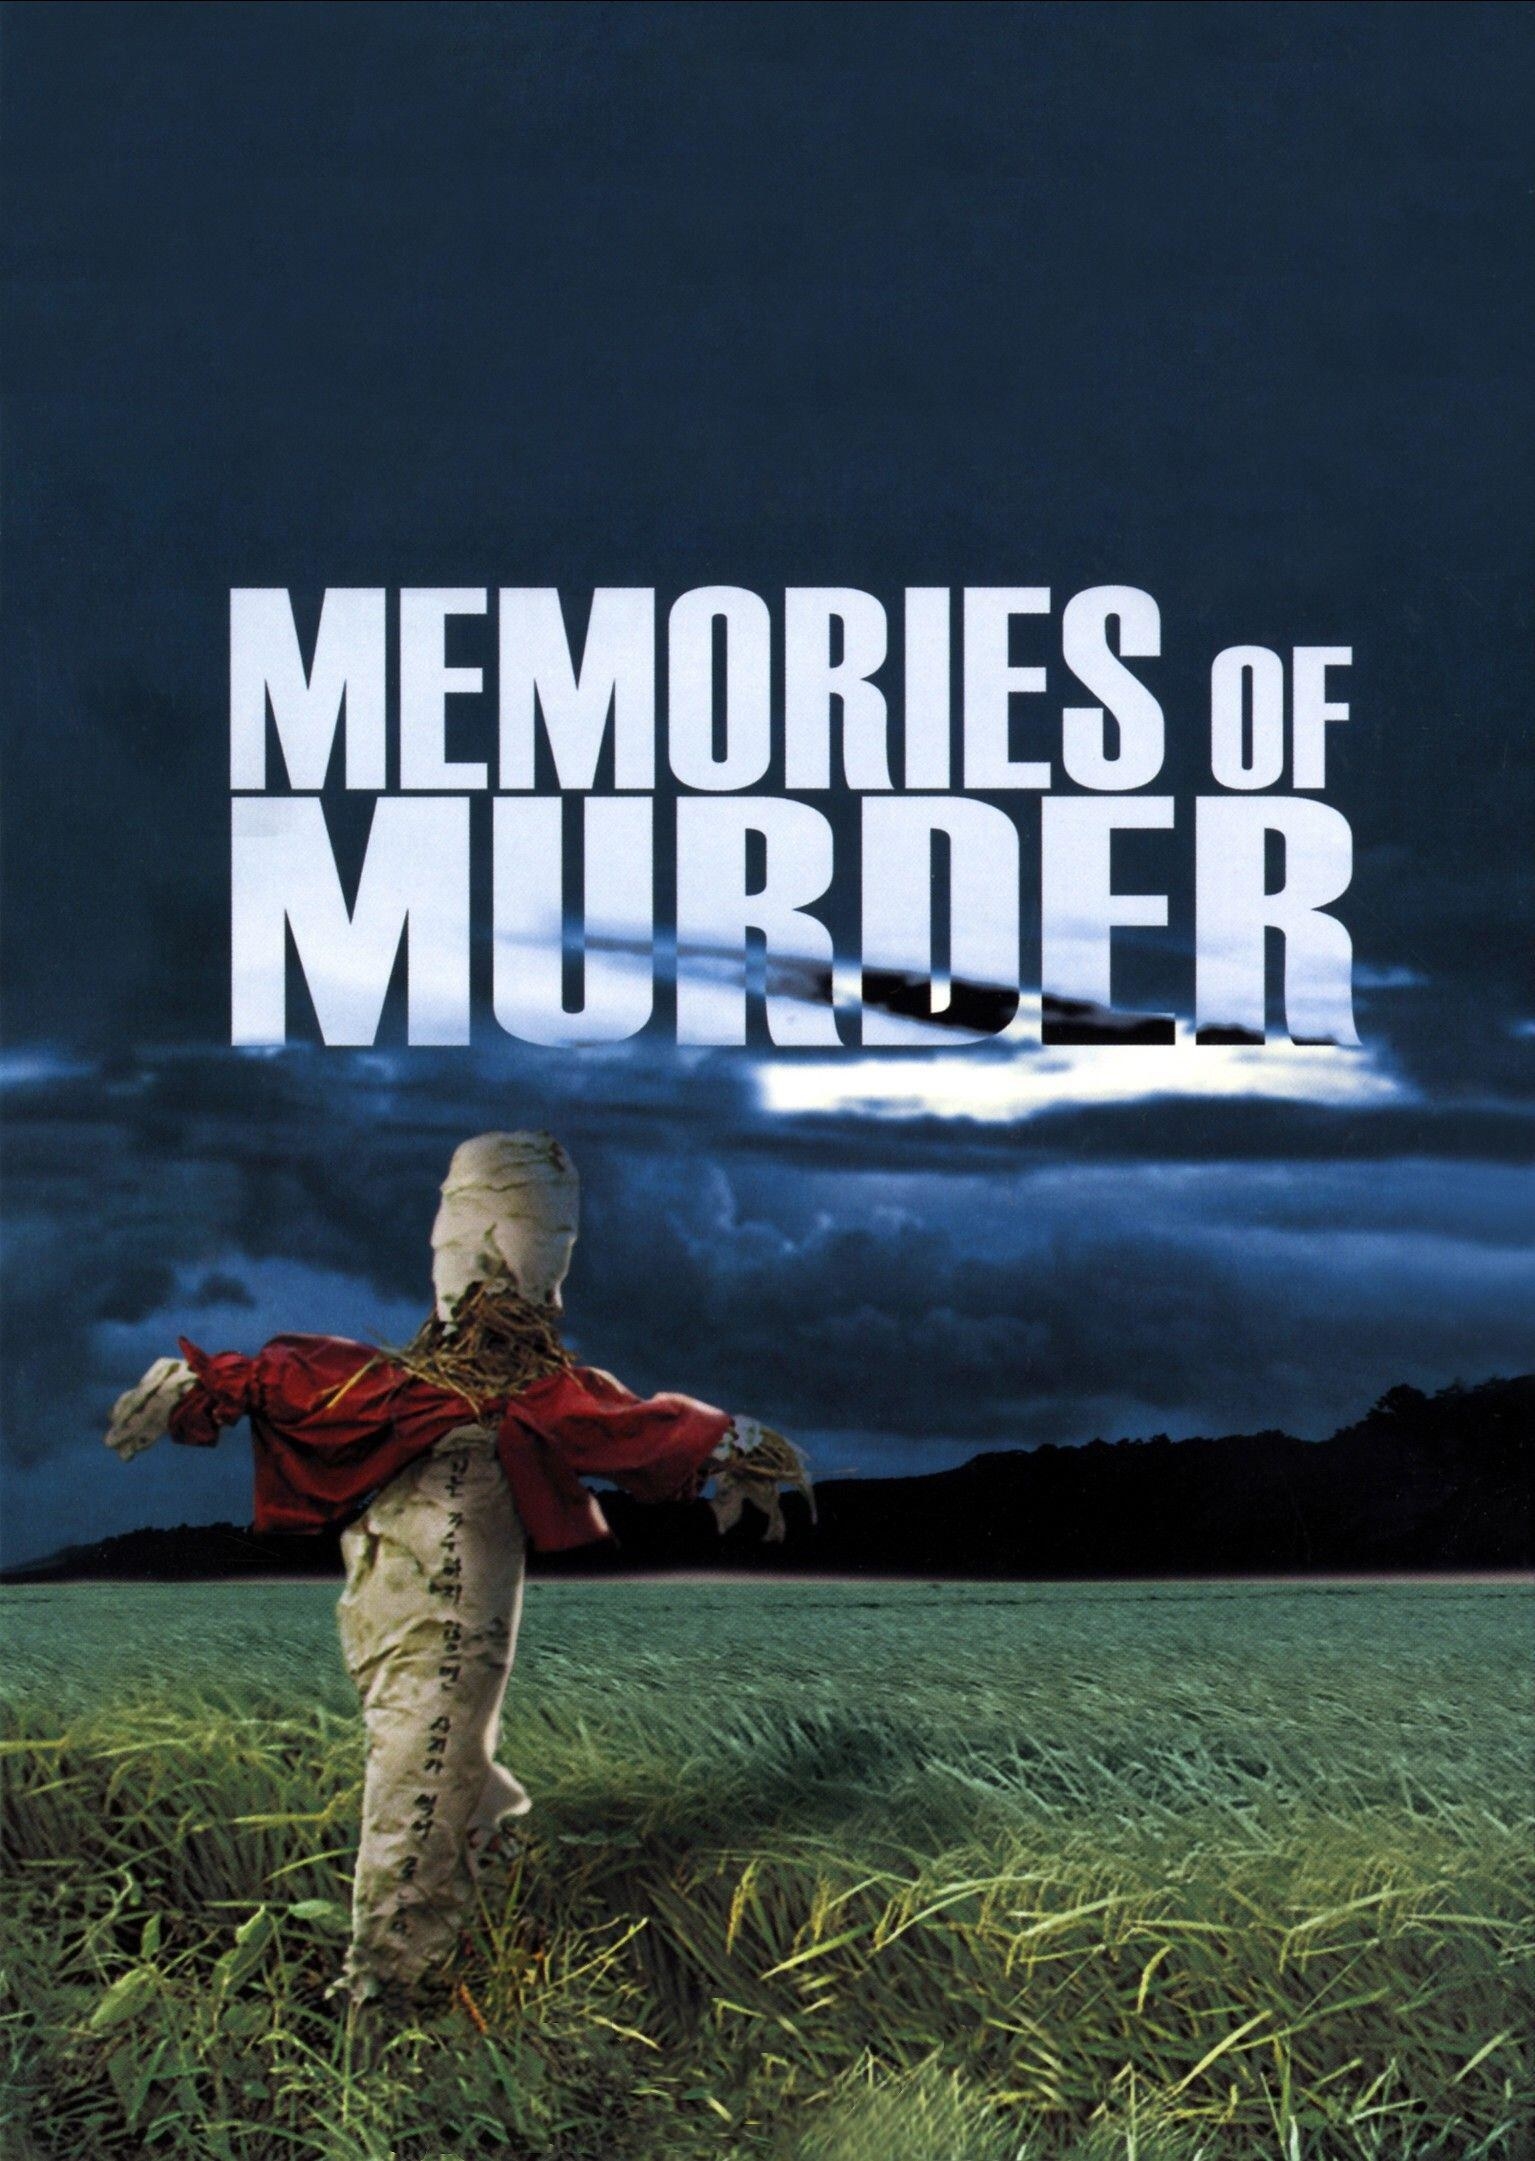 Poster image for the movie &quot;Memories of Murder&quot; depicting a scarecrow in a field